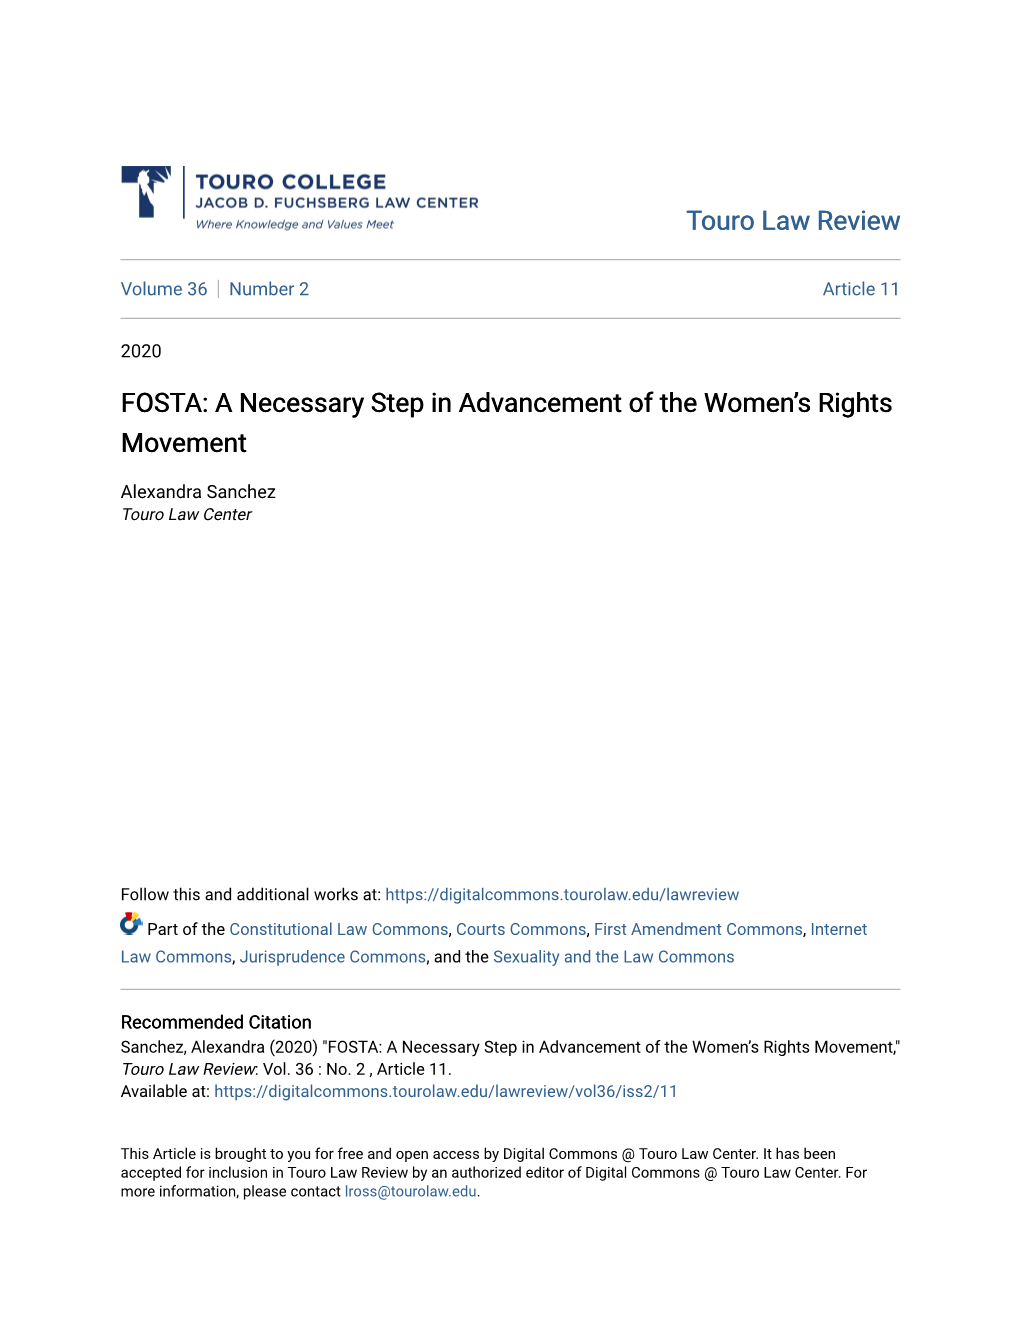 FOSTA: a Necessary Step in Advancement of the Women’S Rights Movement